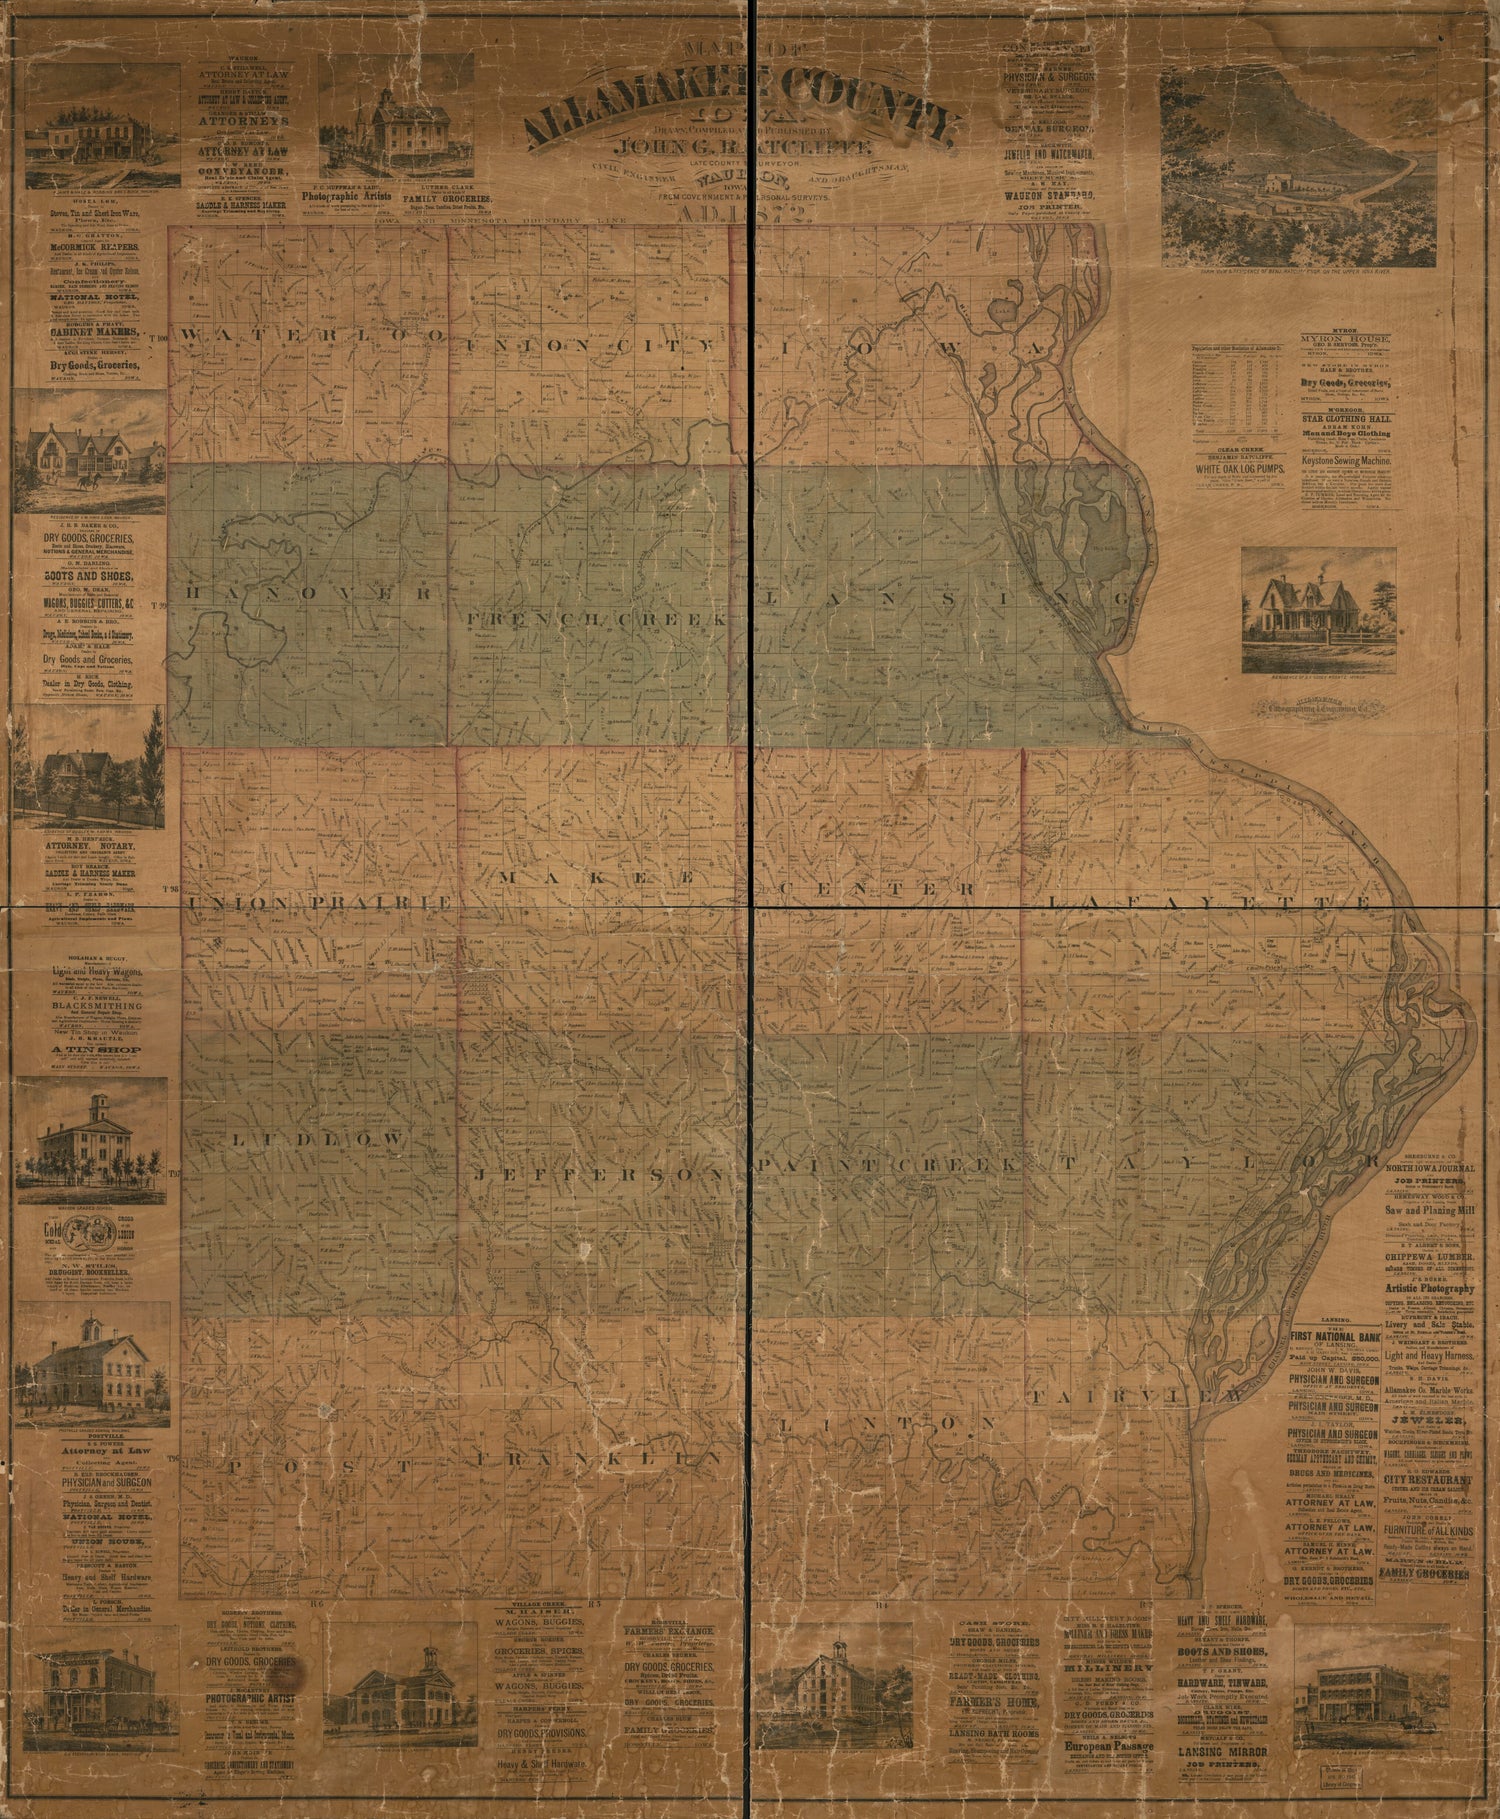 This old map of Map of Allamakee County, Iowa from 1872 was created by John G. Ratcliffe in 1872